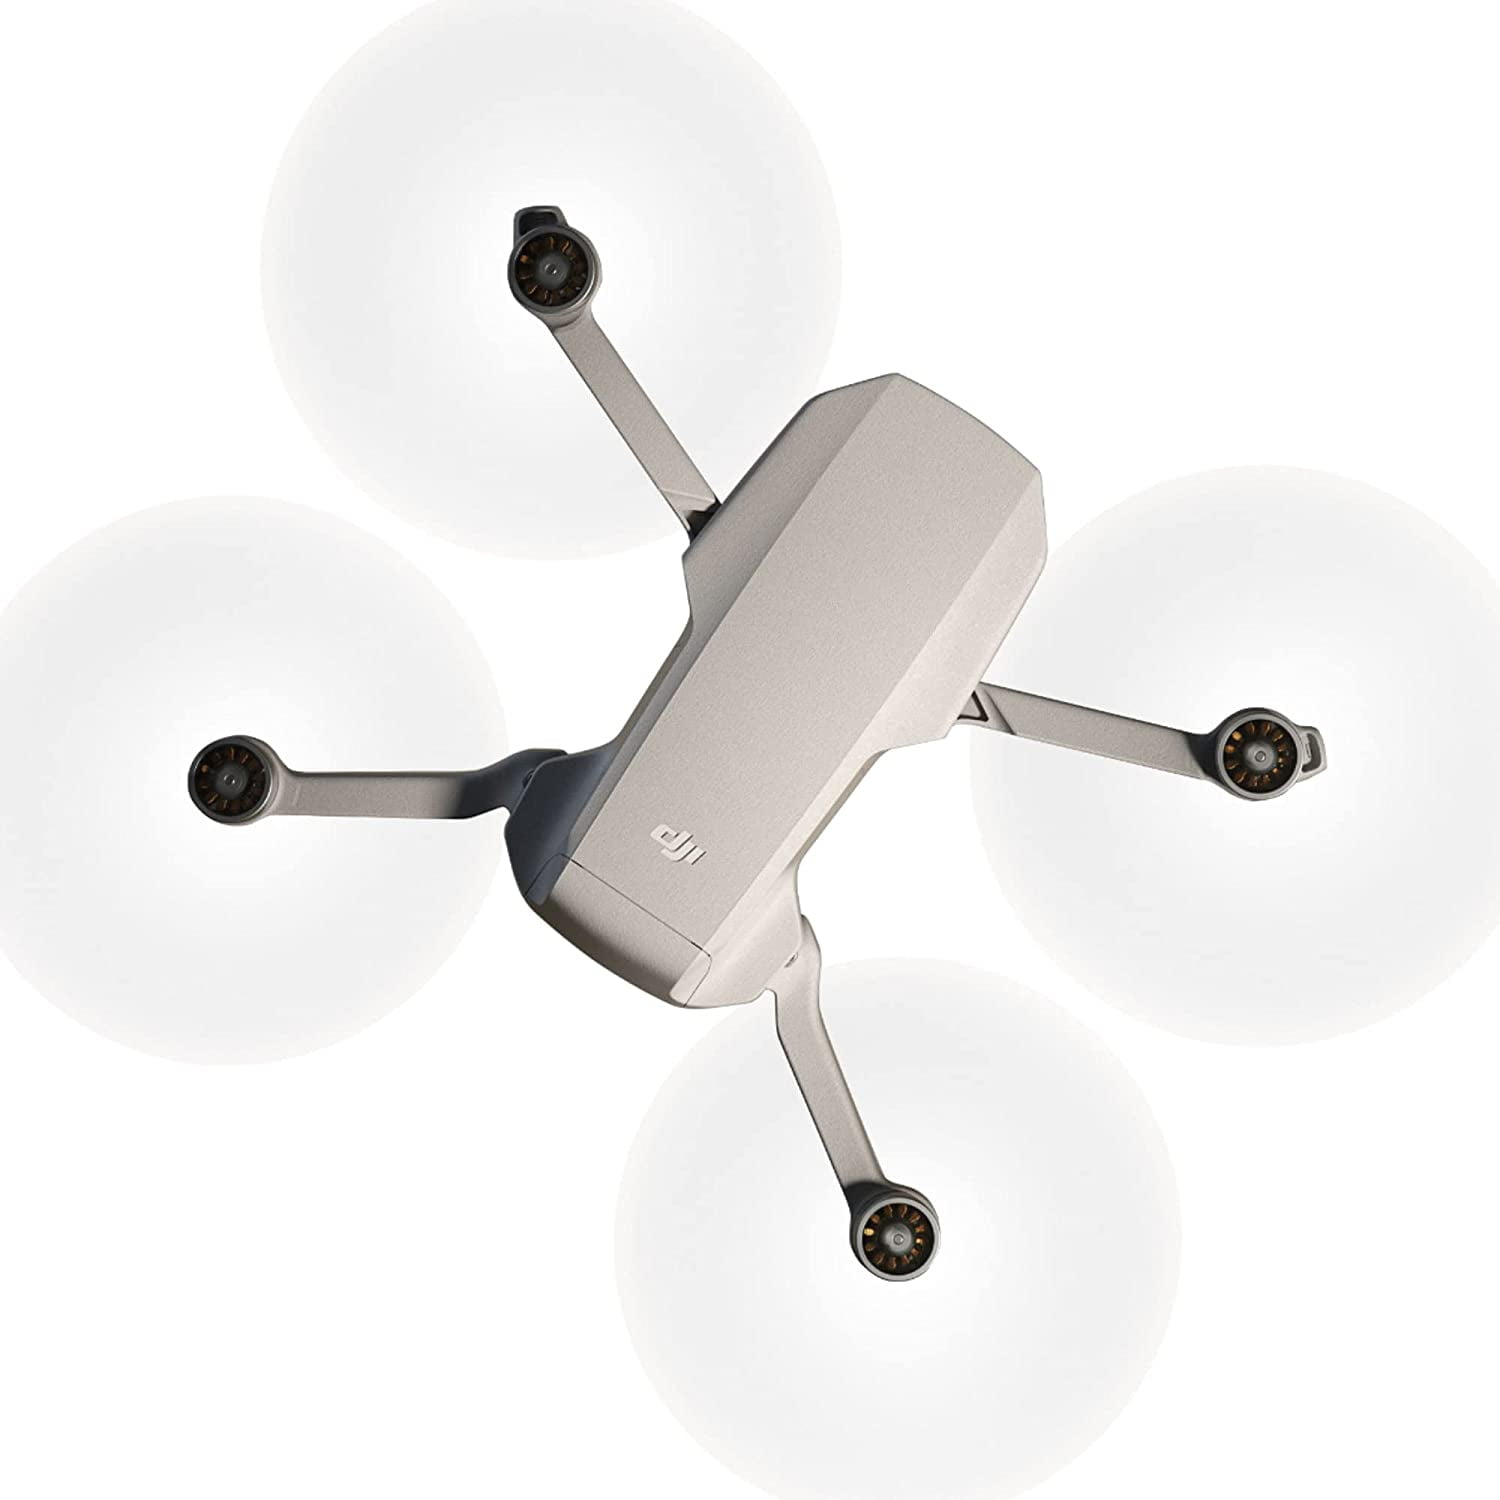 DJI Mini 2 review: the best drone under $500 - The Verge